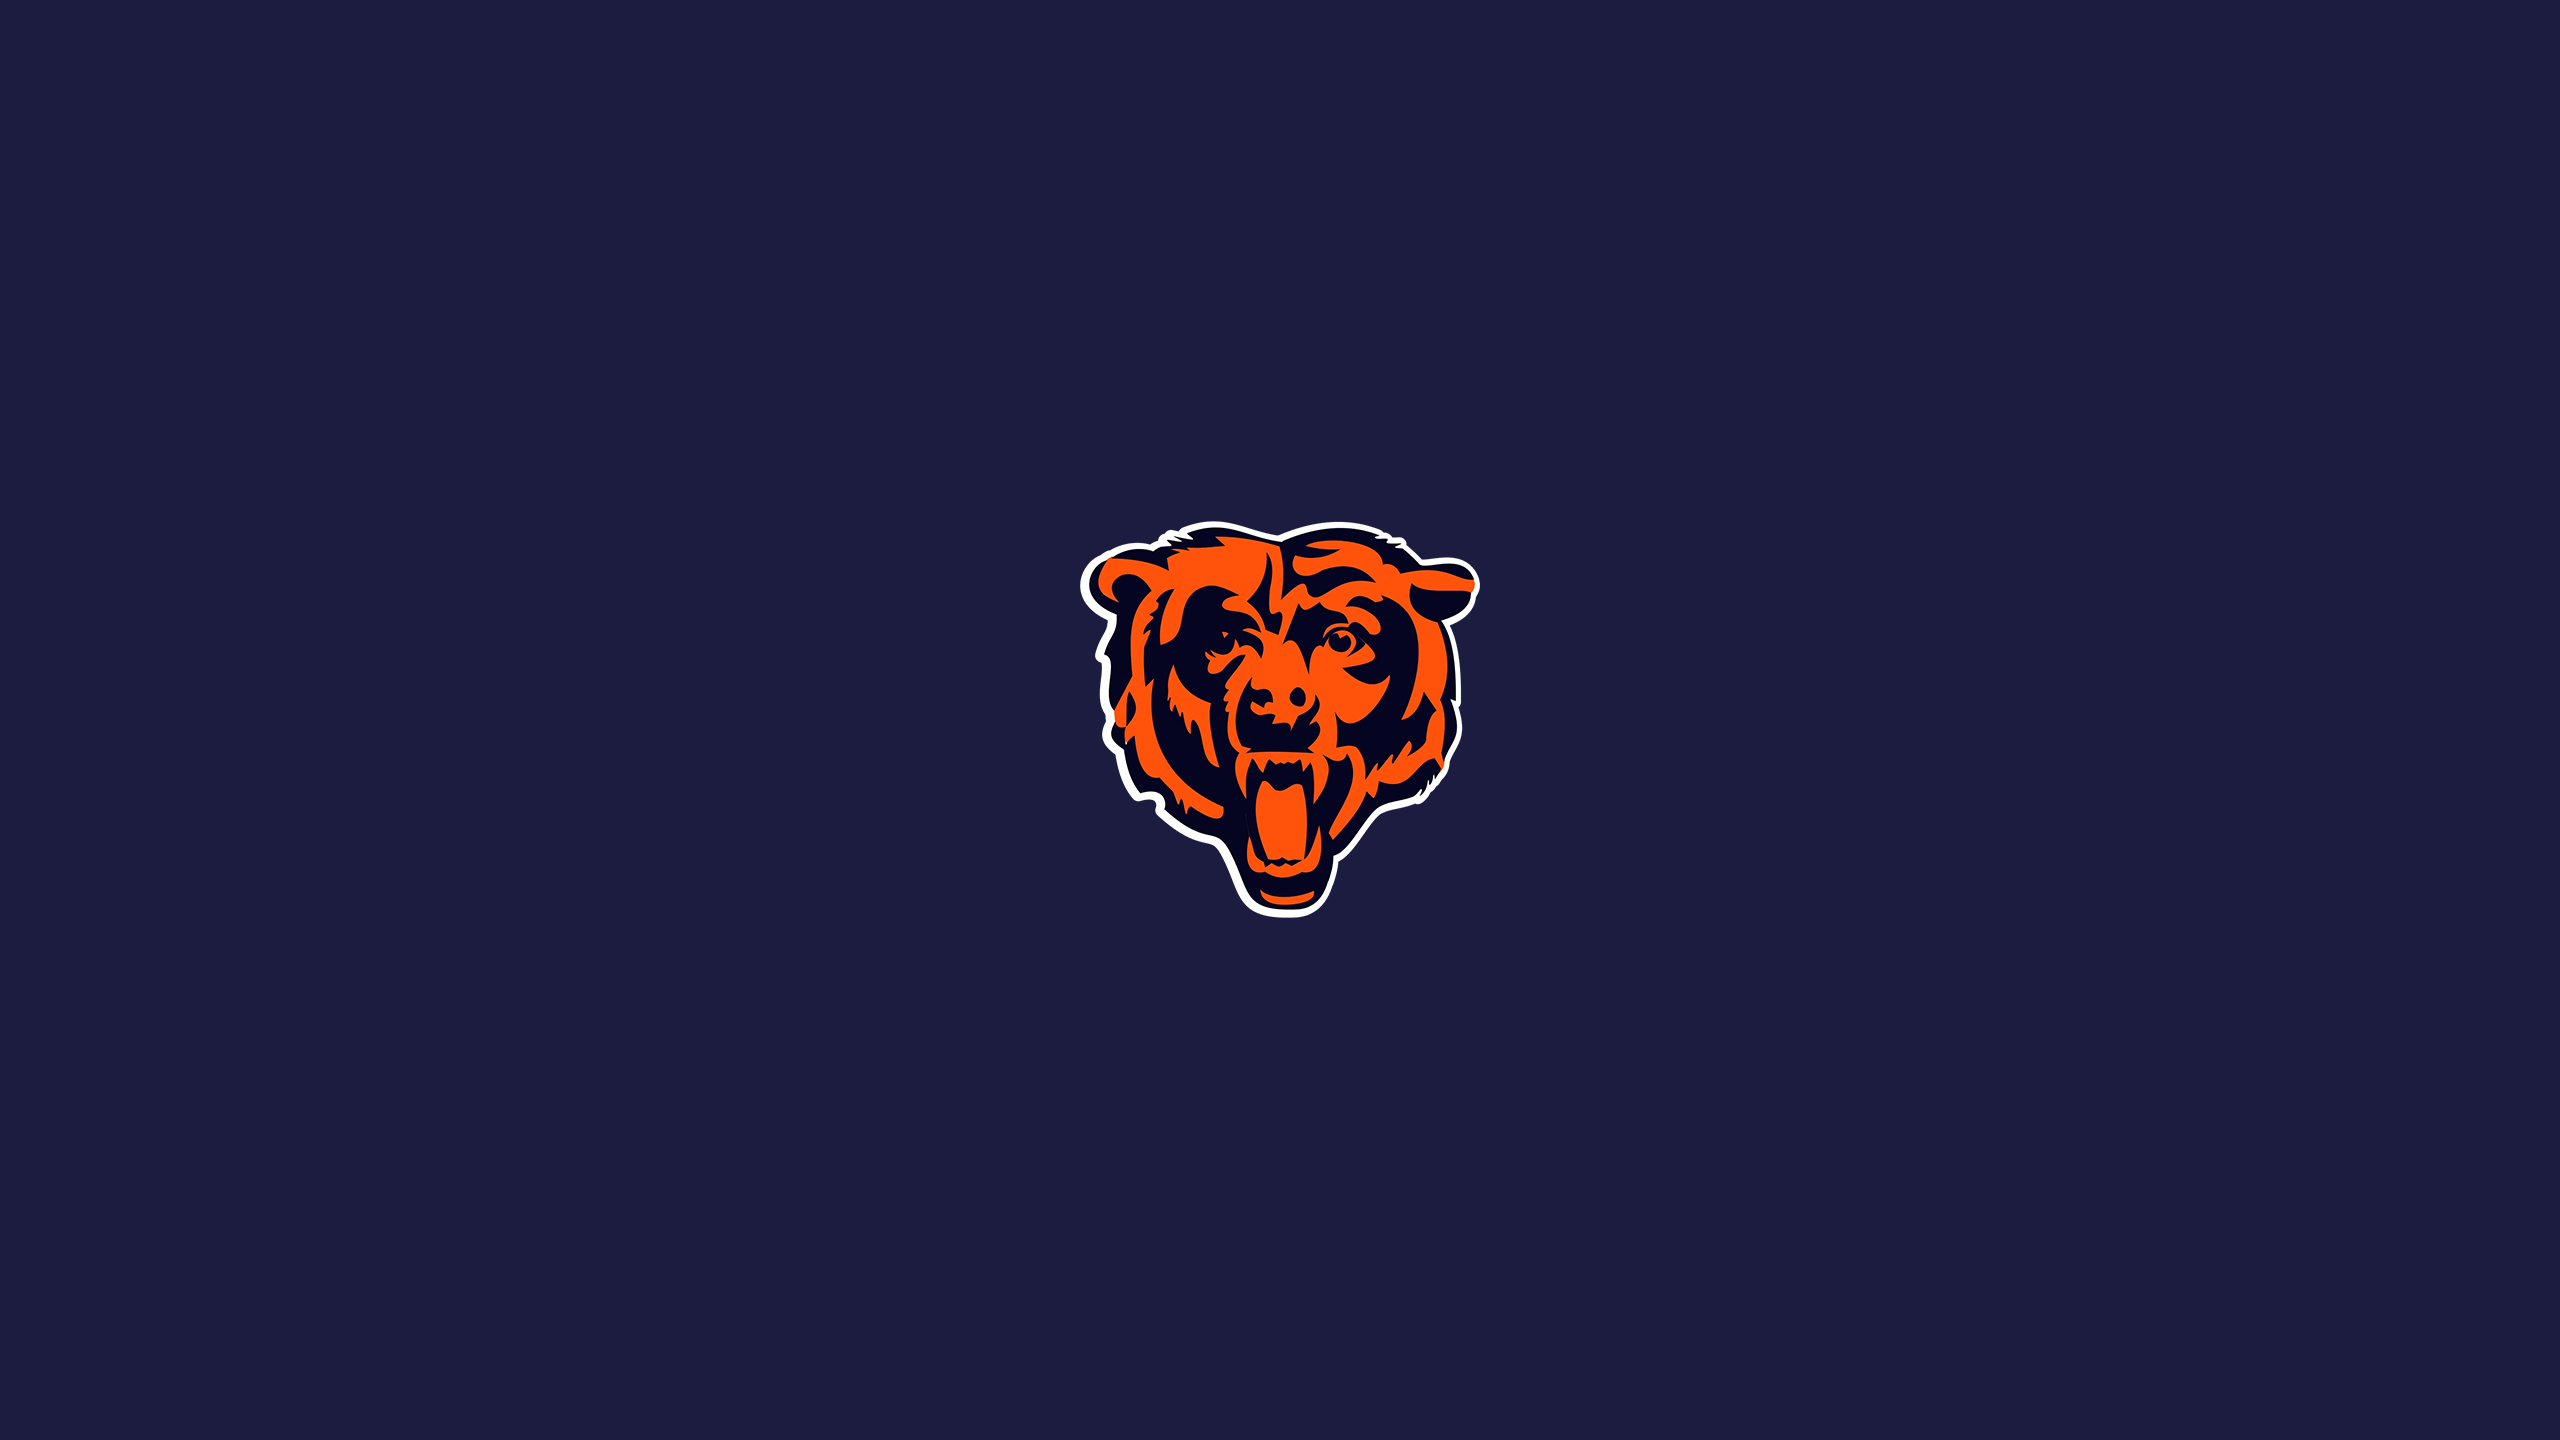 Chicago Bears - NFL - Square Bettor